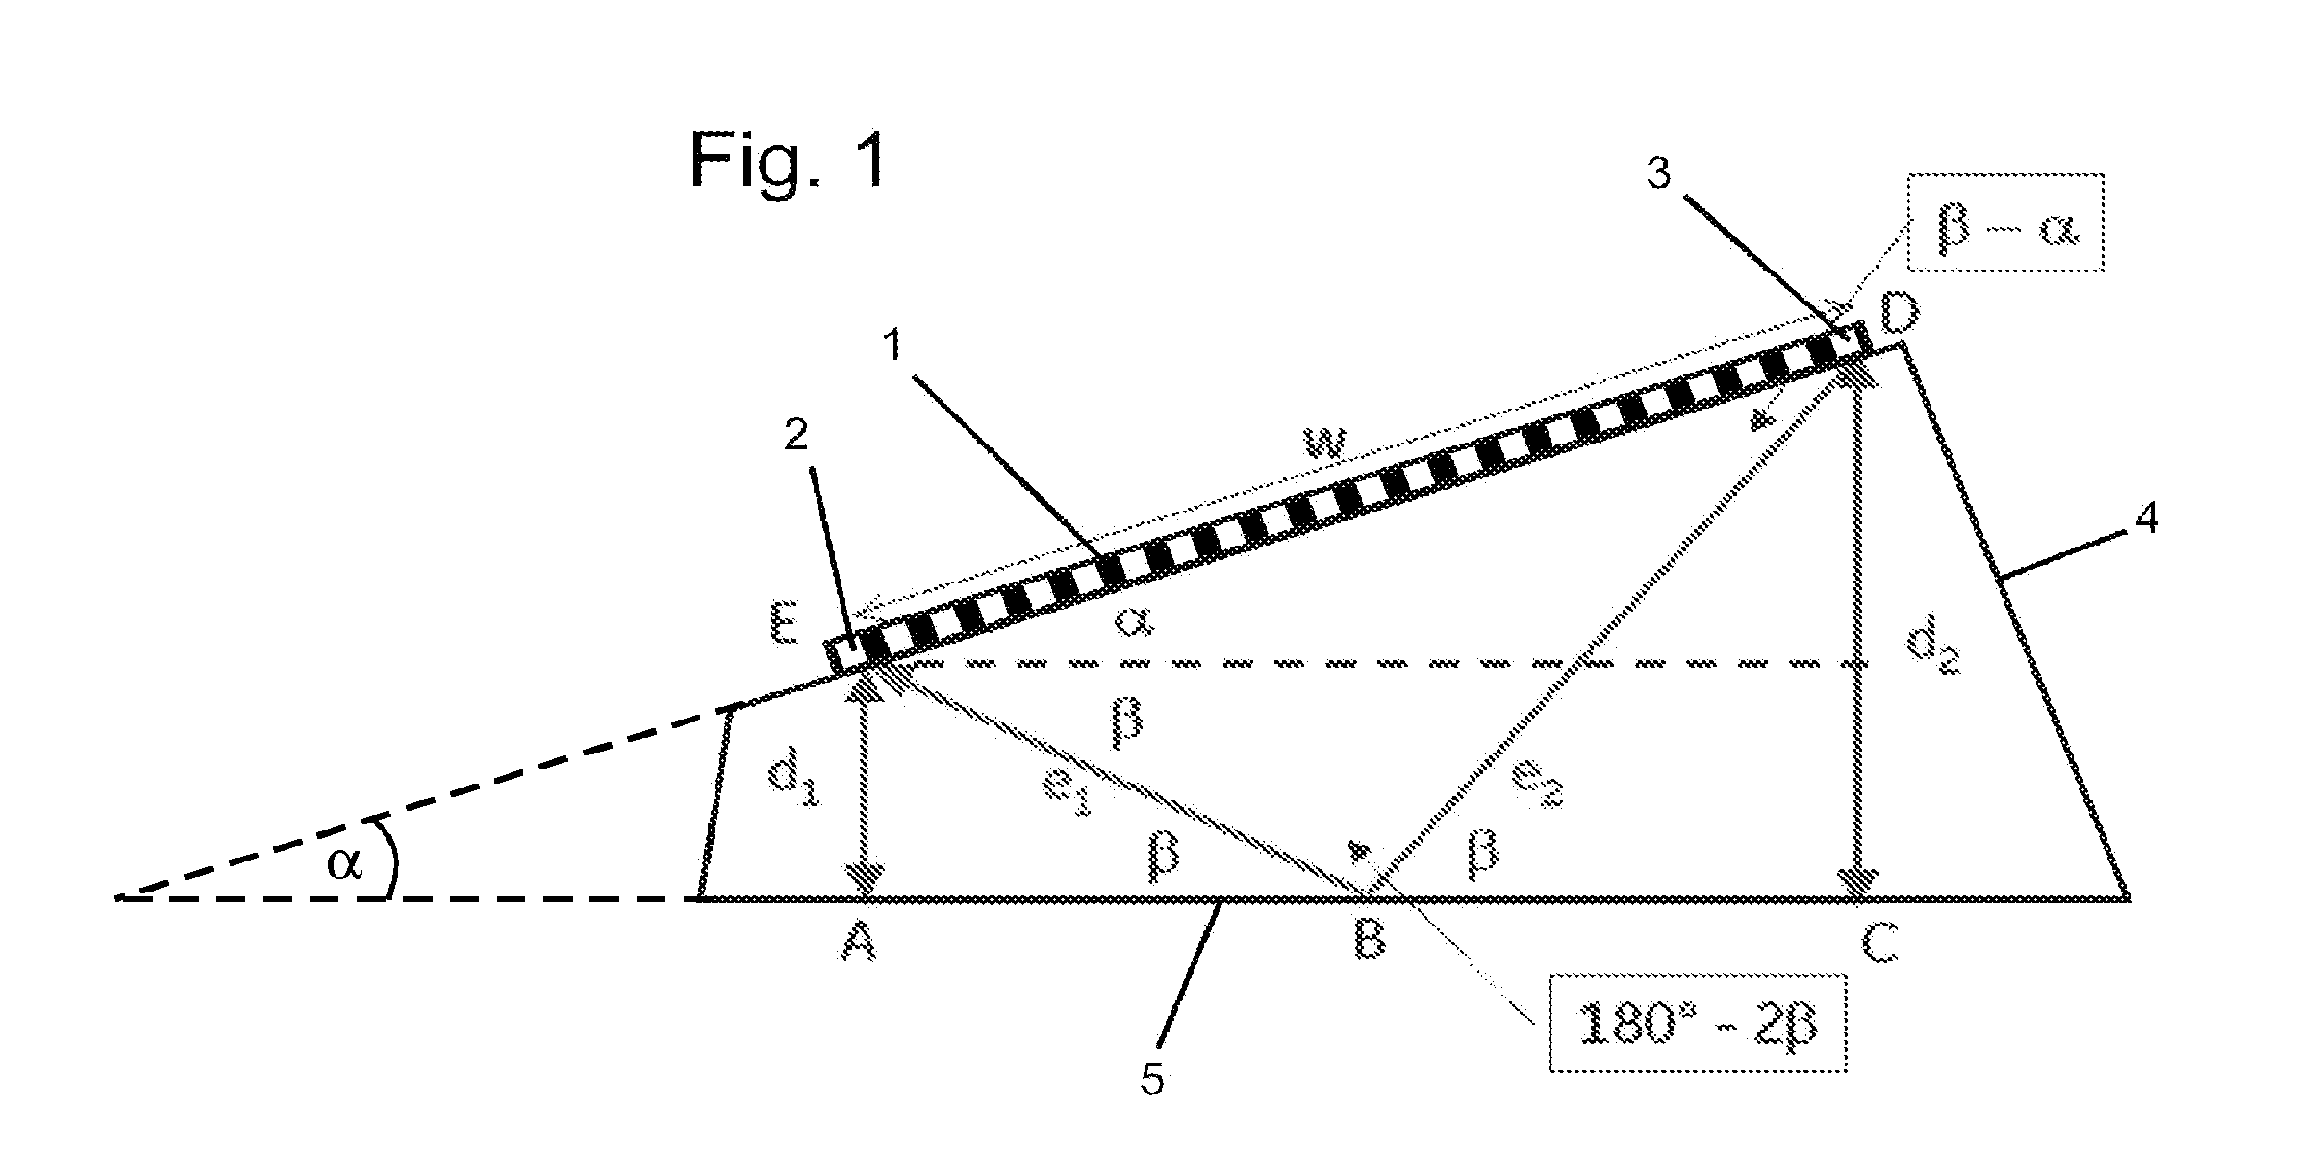 Pulse-echo method by means of an array-type probe and temperature compensation